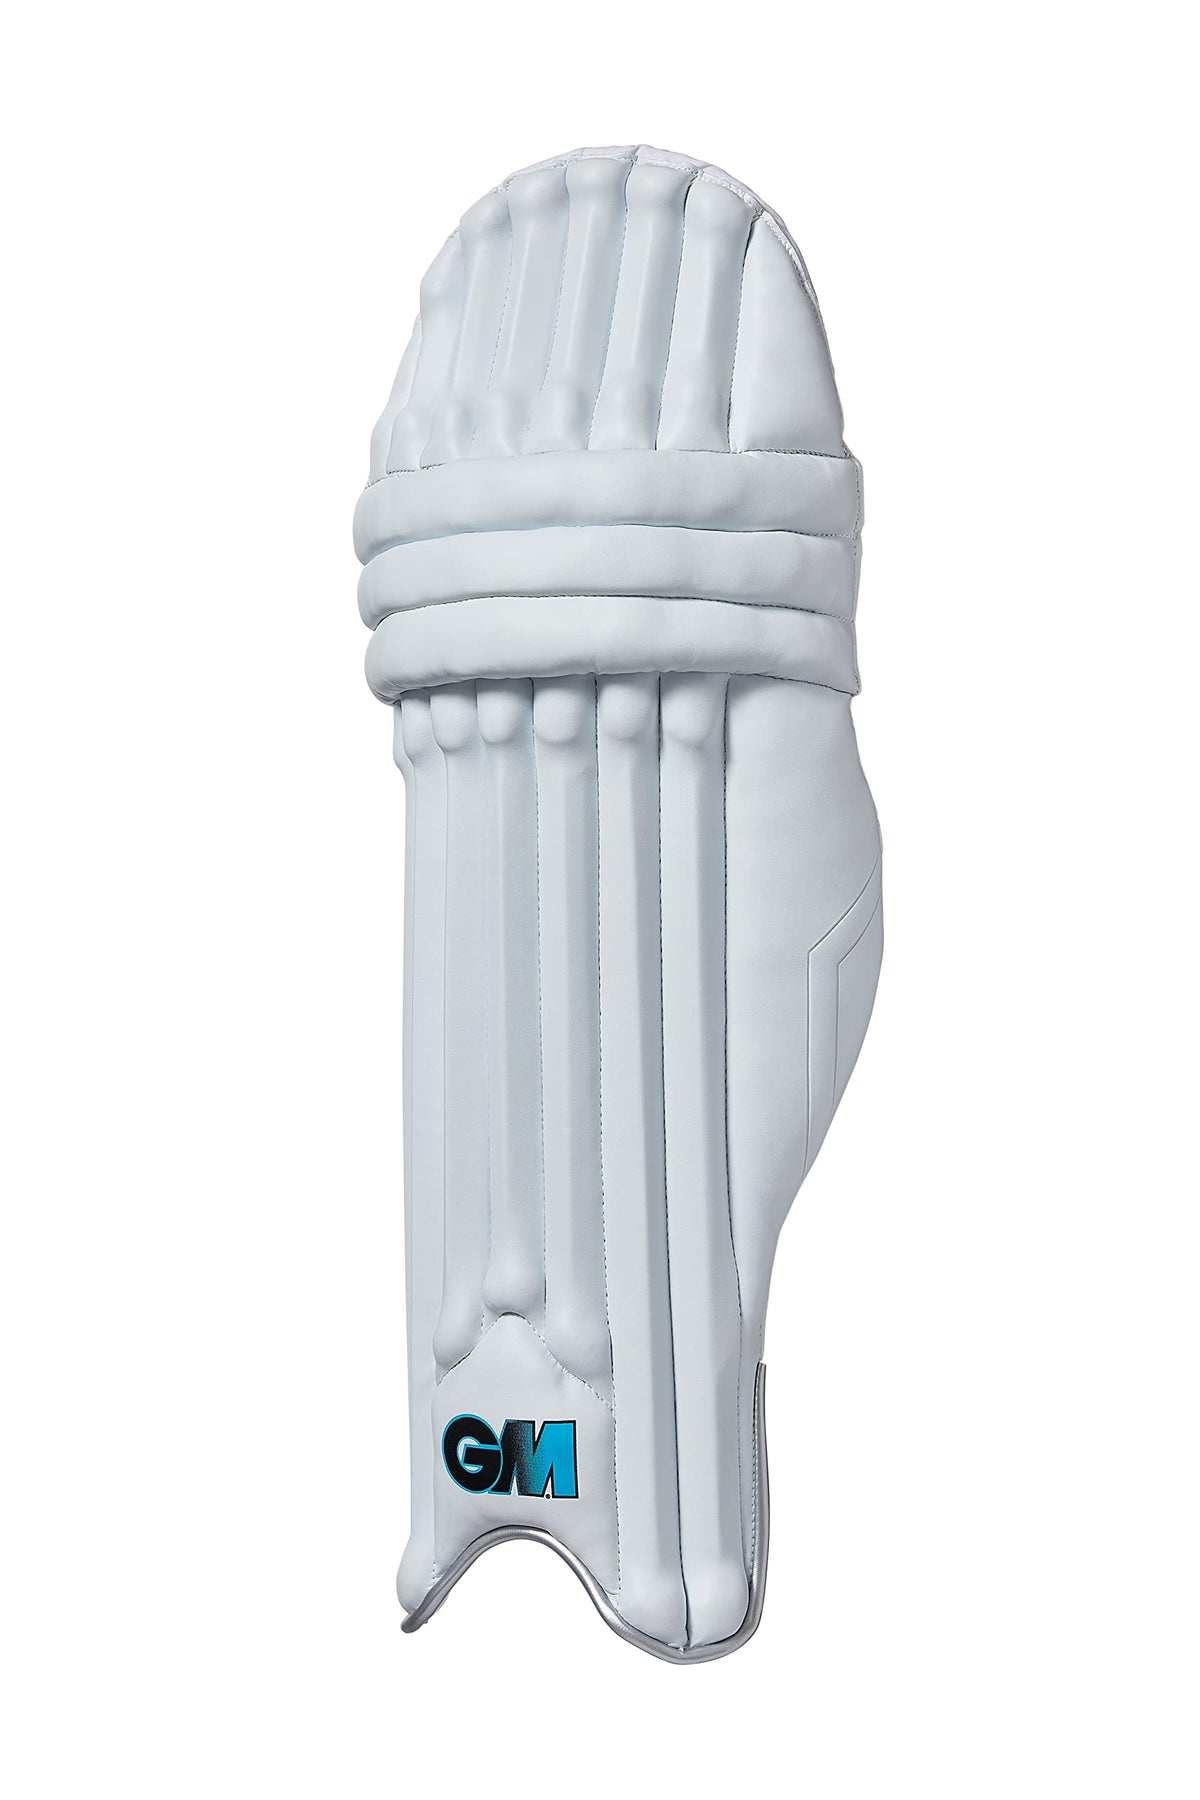 Gunn And Moore Gm Cricket Batting Leg Pads/Guards, Ben Stokes Bs55 Diamond 404, Blue, Adult Right Handed, 1 Pair, 50362313